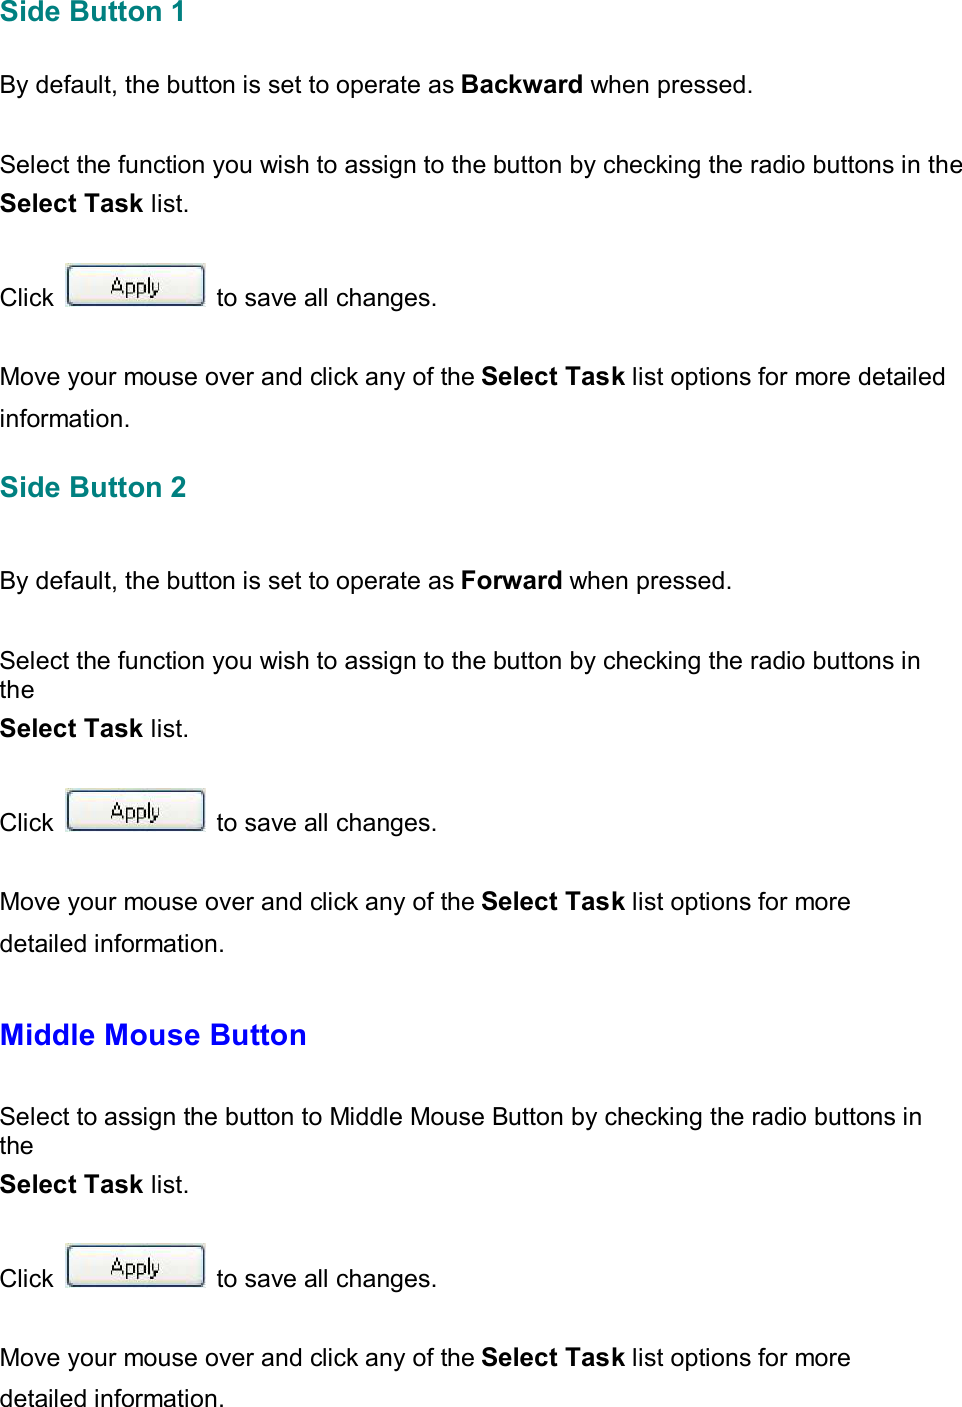 Side Button 1   By default, the button is set to operate as Backward when pressed.    Select the function you wish to assign to the button by checking the radio buttons in the Select Task list.   Click   to save all changes.   Move your mouse over and click any of the Select Task list options for more detailed information. Side Button 2    By default, the button is set to operate as Forward when pressed.    Select the function you wish to assign to the button by checking the radio buttons in the Select Task list.   Click   to save all changes.   Move your mouse over and click any of the Select Task list options for more detailed information.   Middle Mouse Button   Select to assign the button to Middle Mouse Button by checking the radio buttons in the Select Task list.   Click   to save all changes.   Move your mouse over and click any of the Select Task list options for more detailed information.    